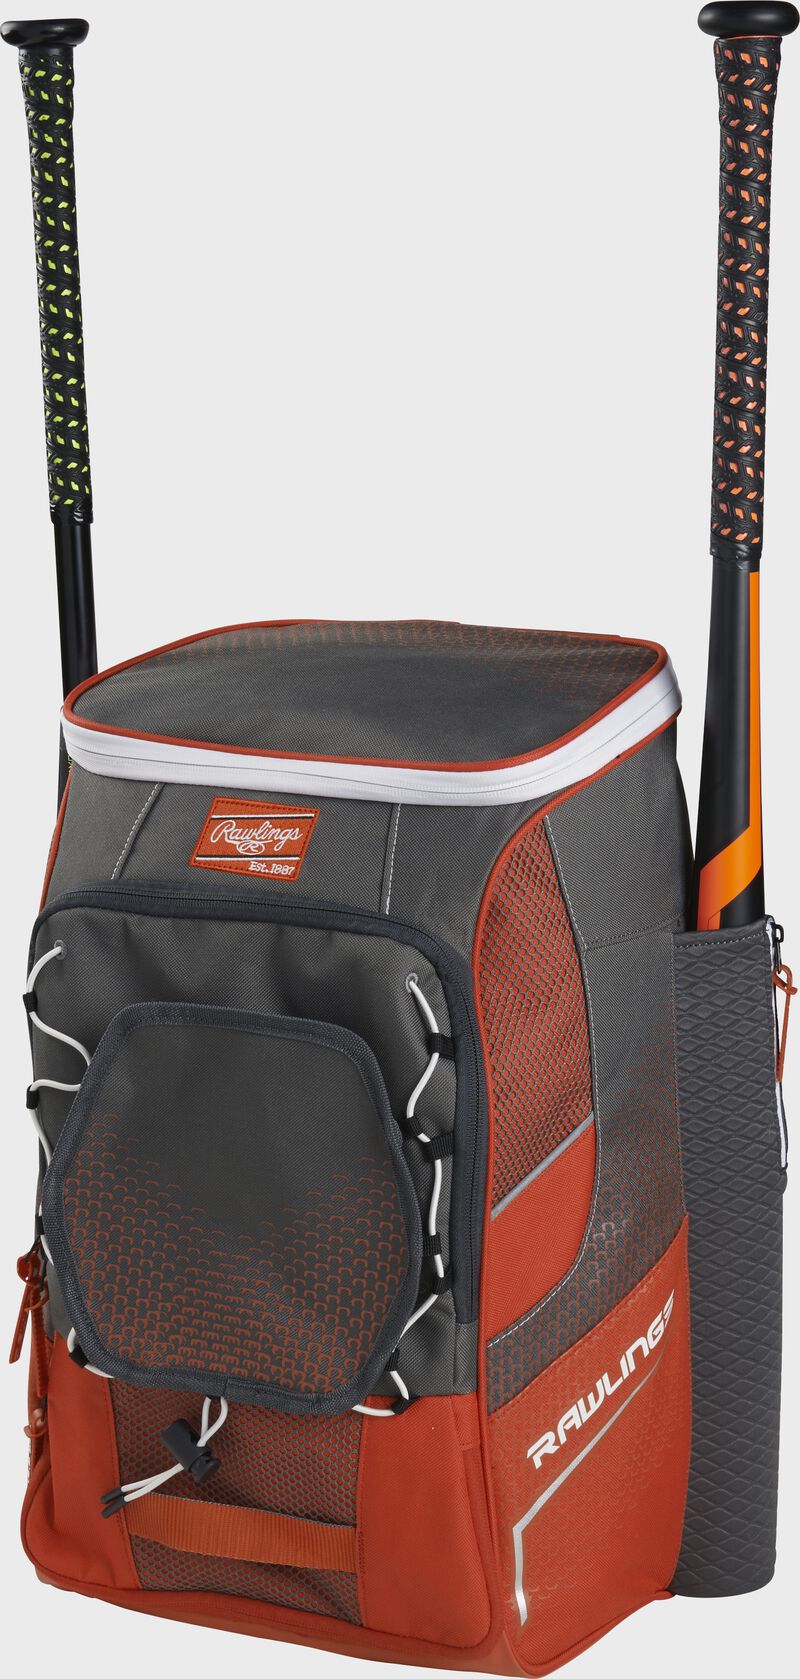 Front right angle view of an orange Impulse backpack with two bats in the side sleeves - SKU: IMPLSE-BO